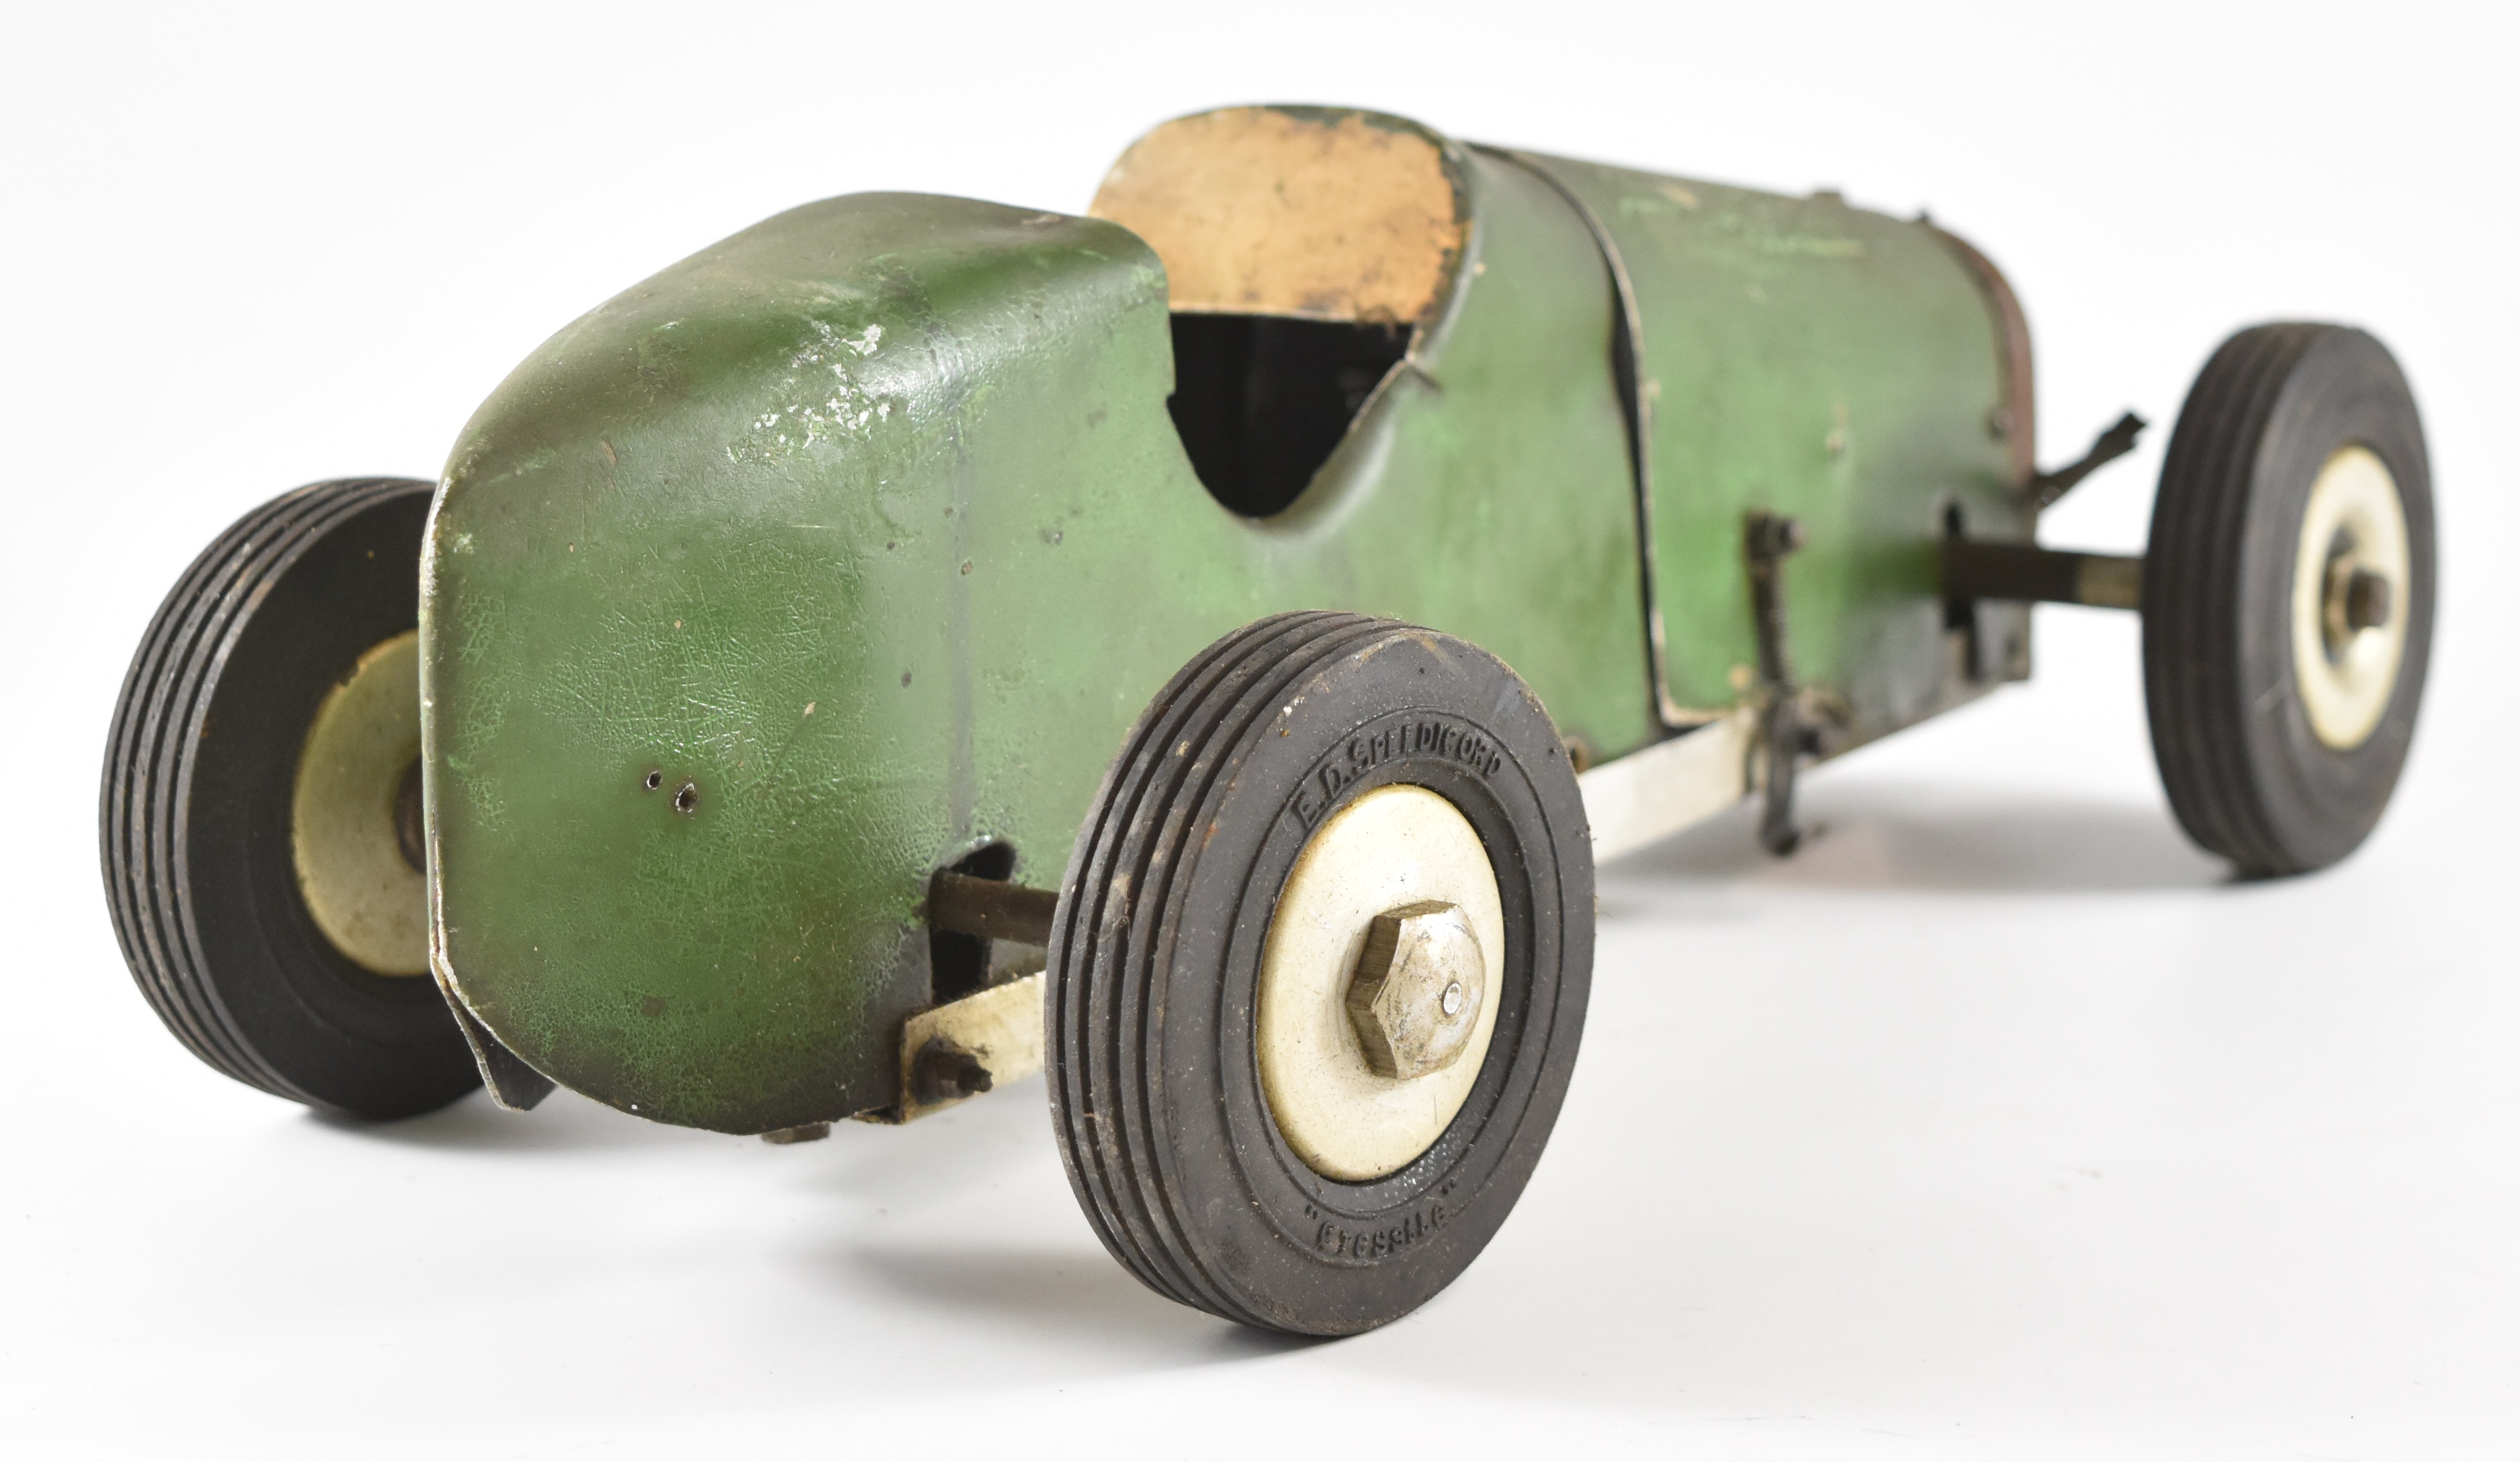 Vintage diesel engine powered model pylon racing car in the style of a 1930s single seat racing car, - Image 3 of 7